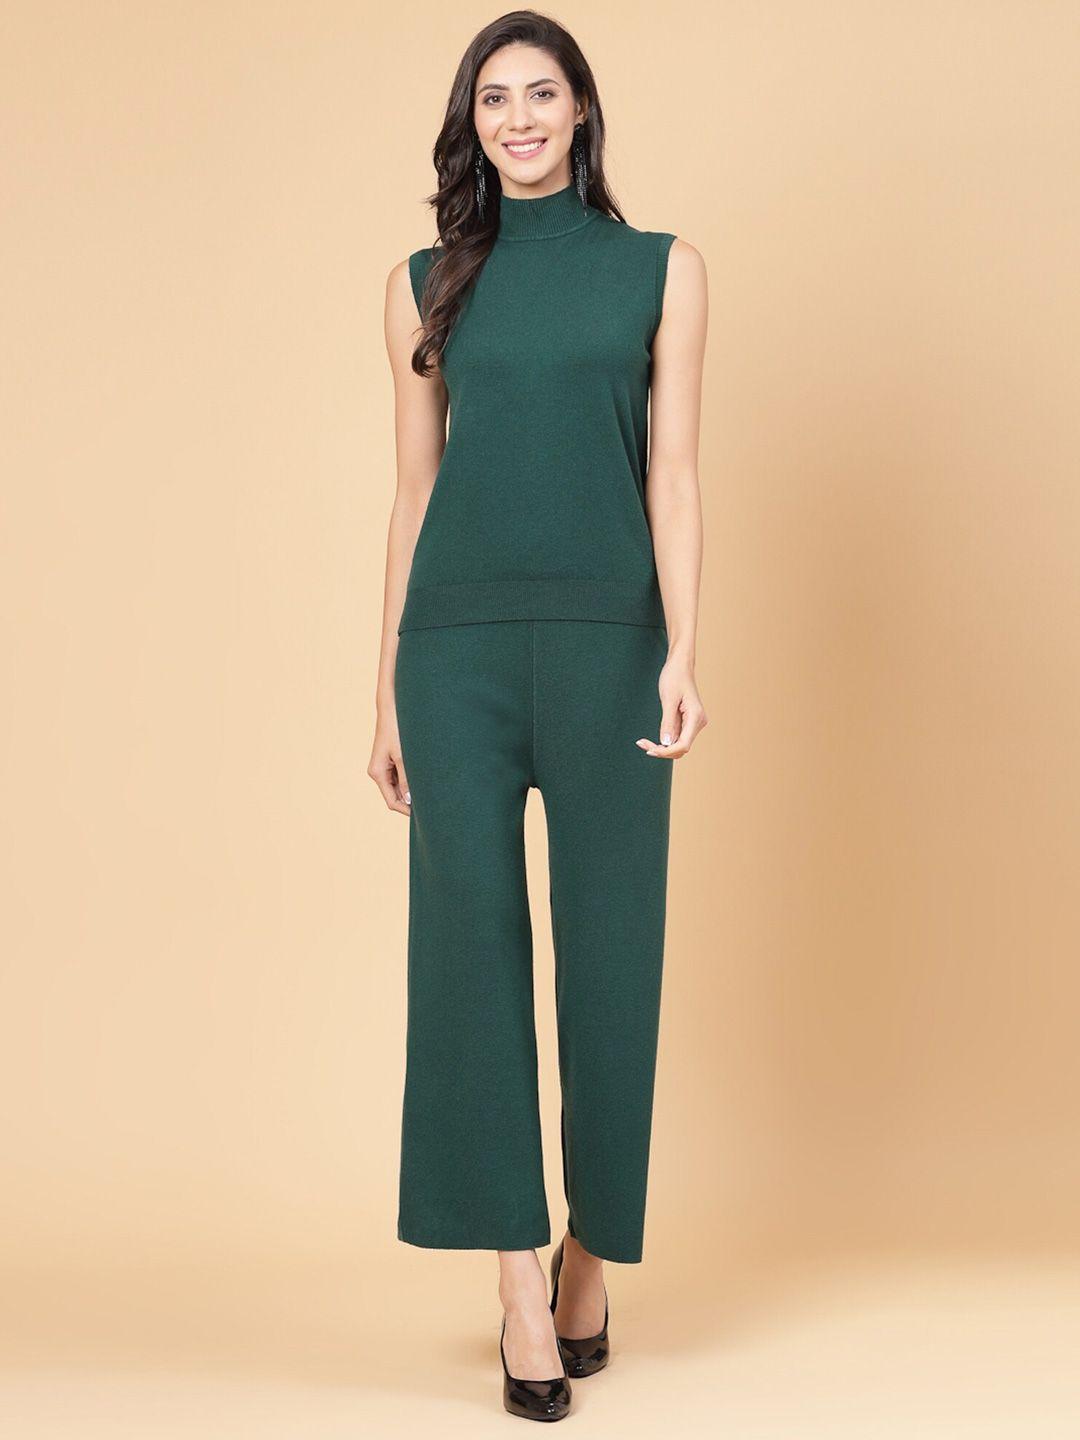 mafadeny high neck top with trousers & shrug